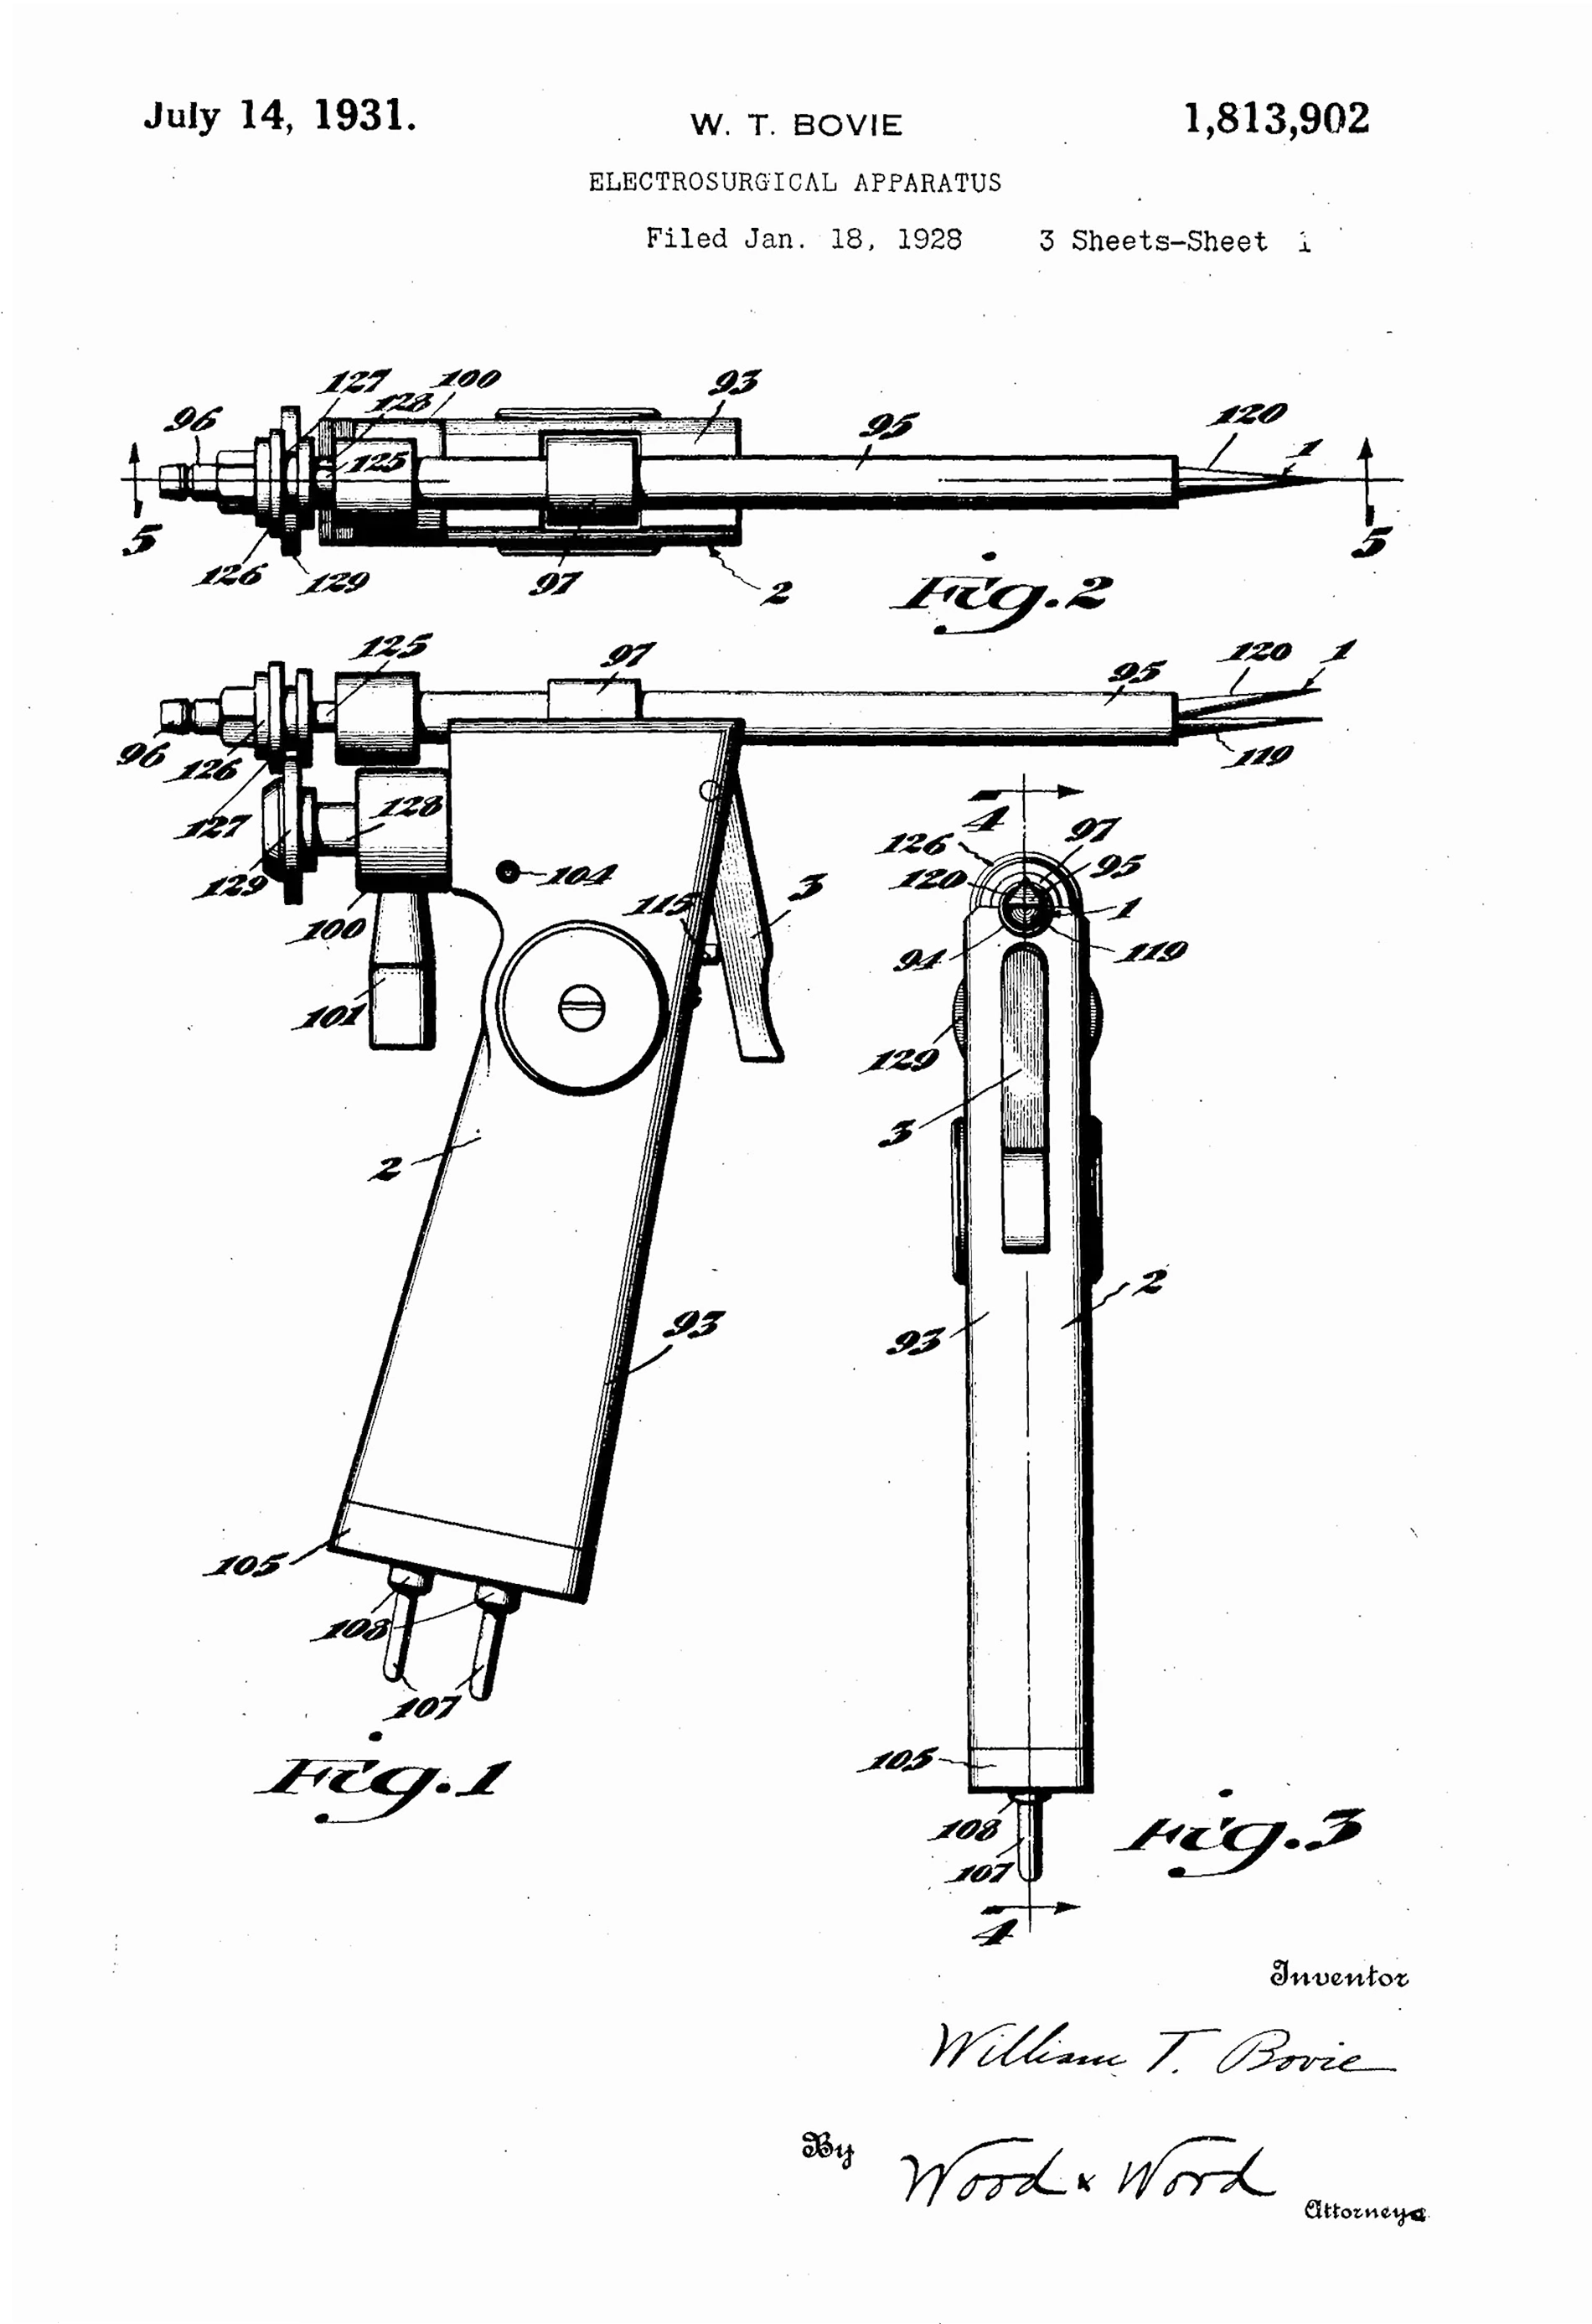 Patent diagram dated July 14, 1931 of an electrocautery surgery device shaped like a handgun. The diagram details the mechanisms and circuitry of the device. 